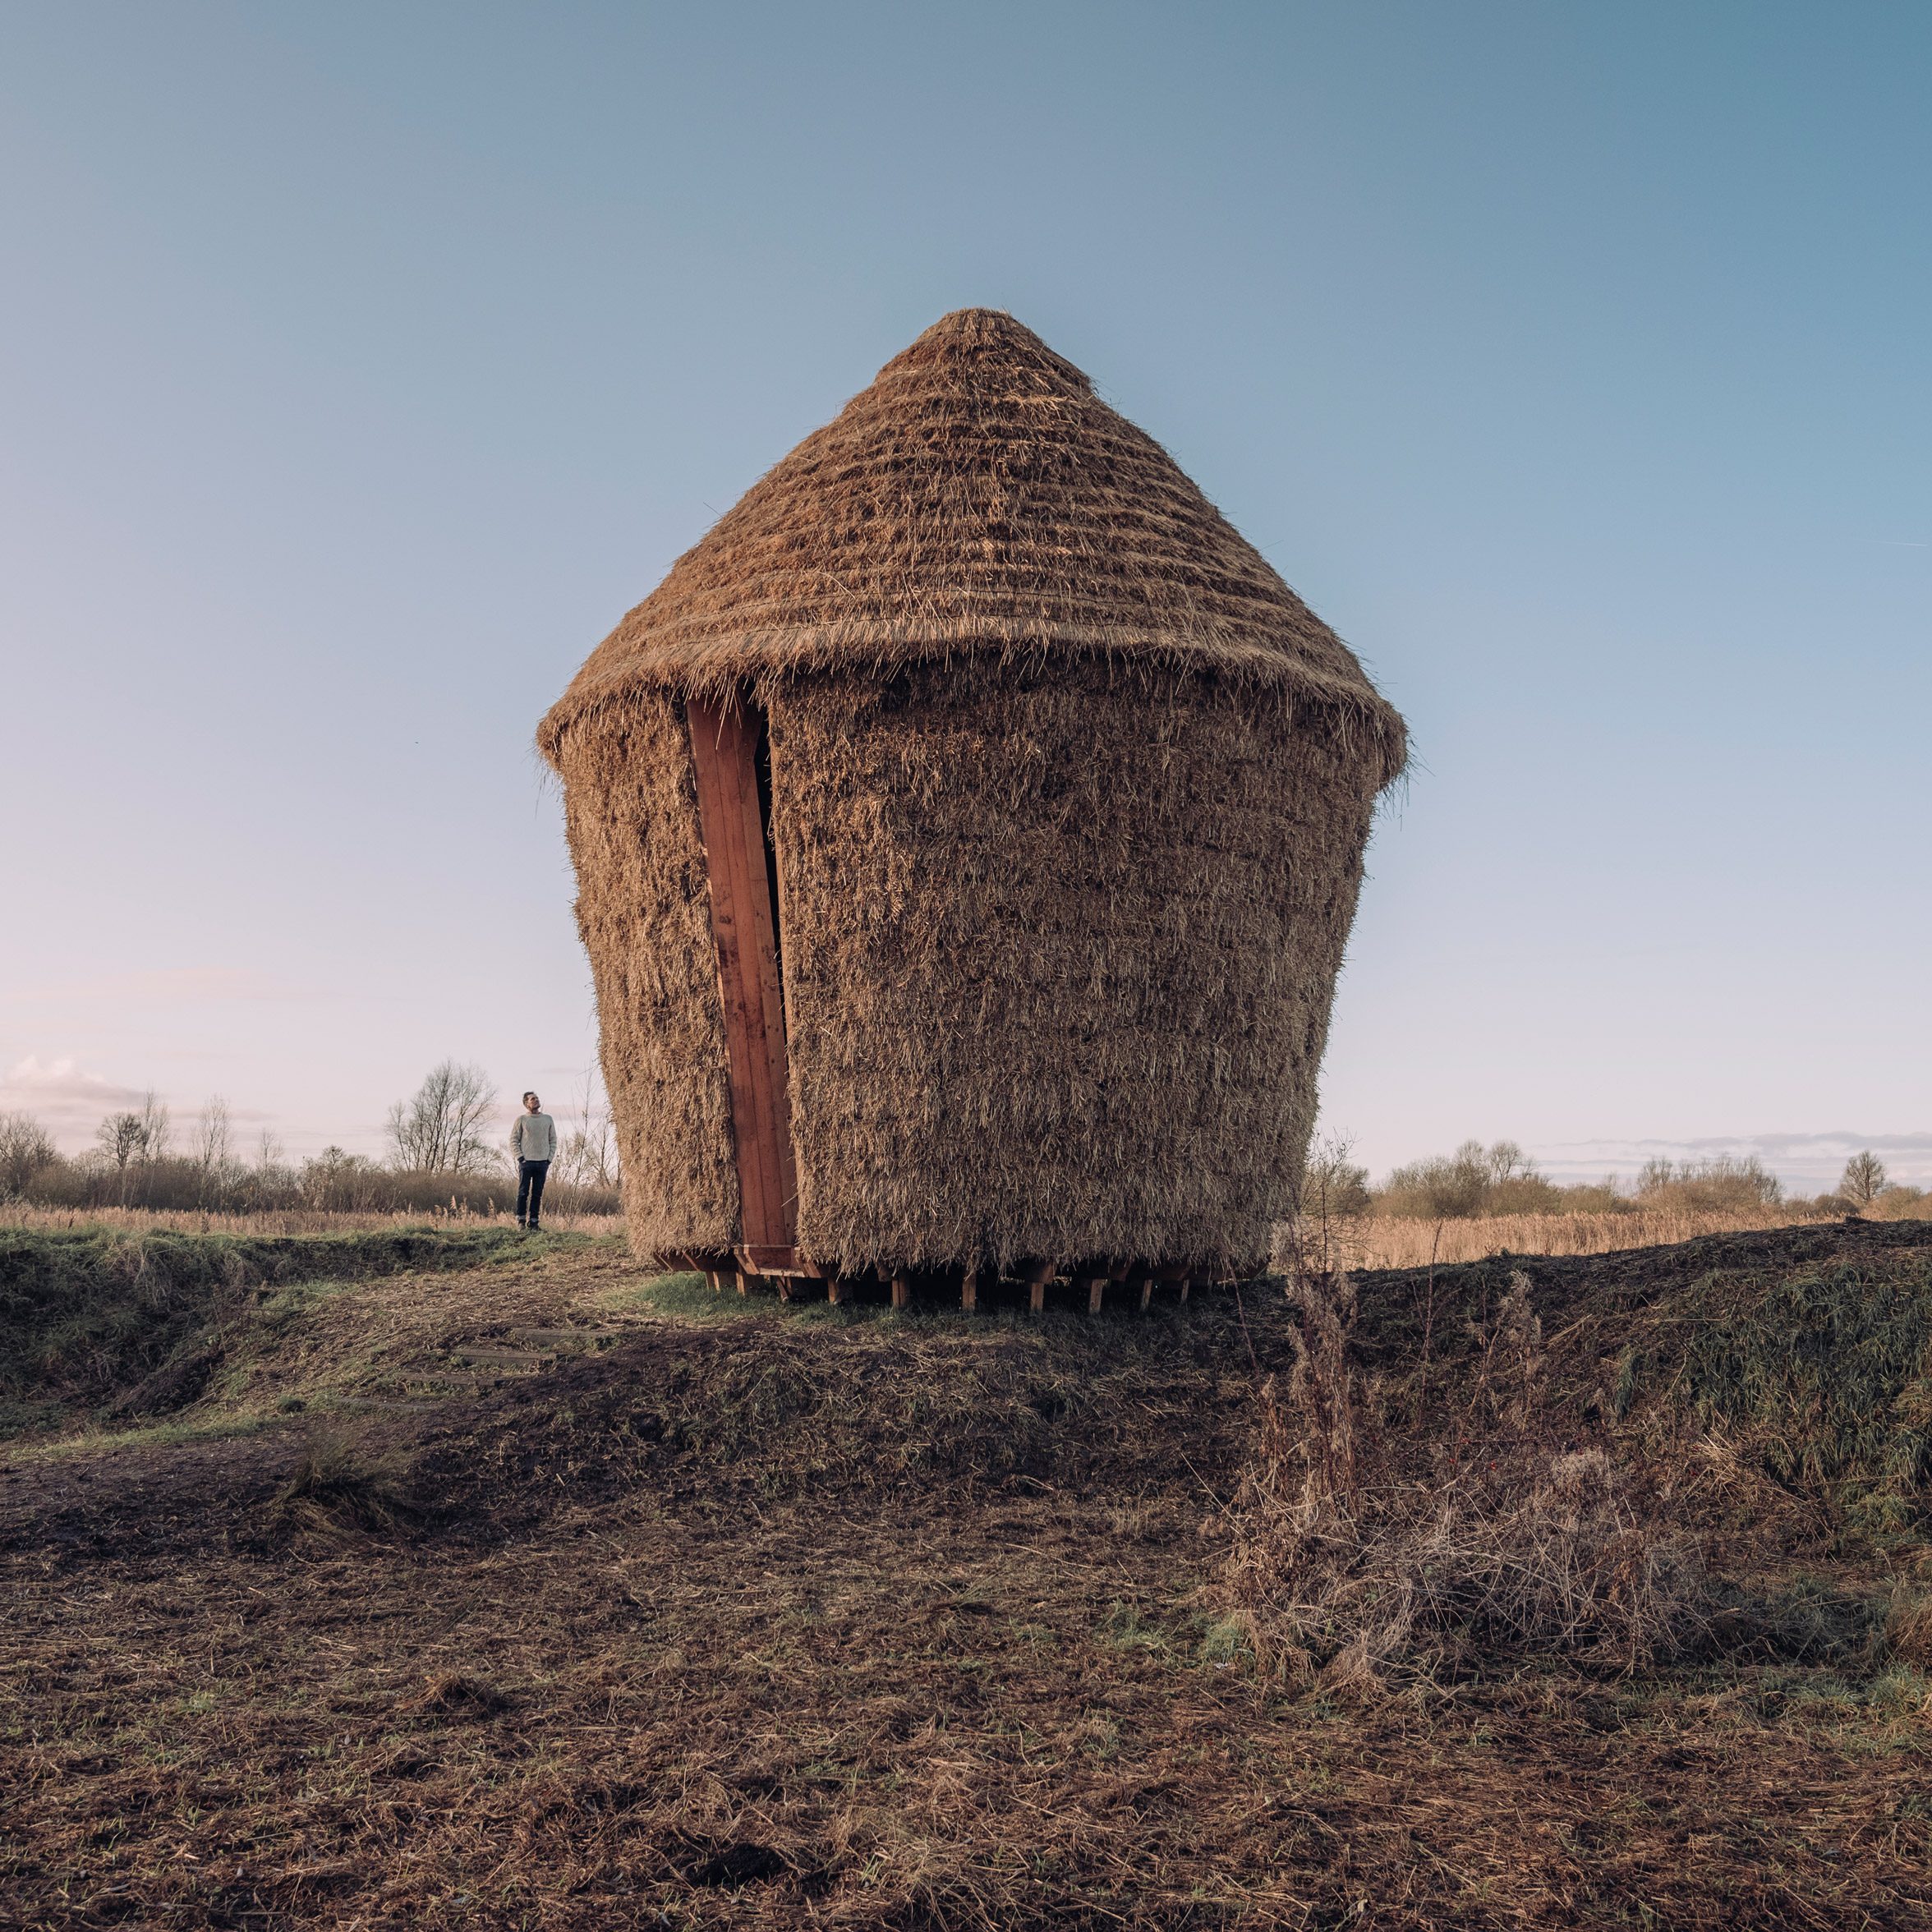 Top 10 British architecture projects of 2020: Mother thatched hut by Studio Morison